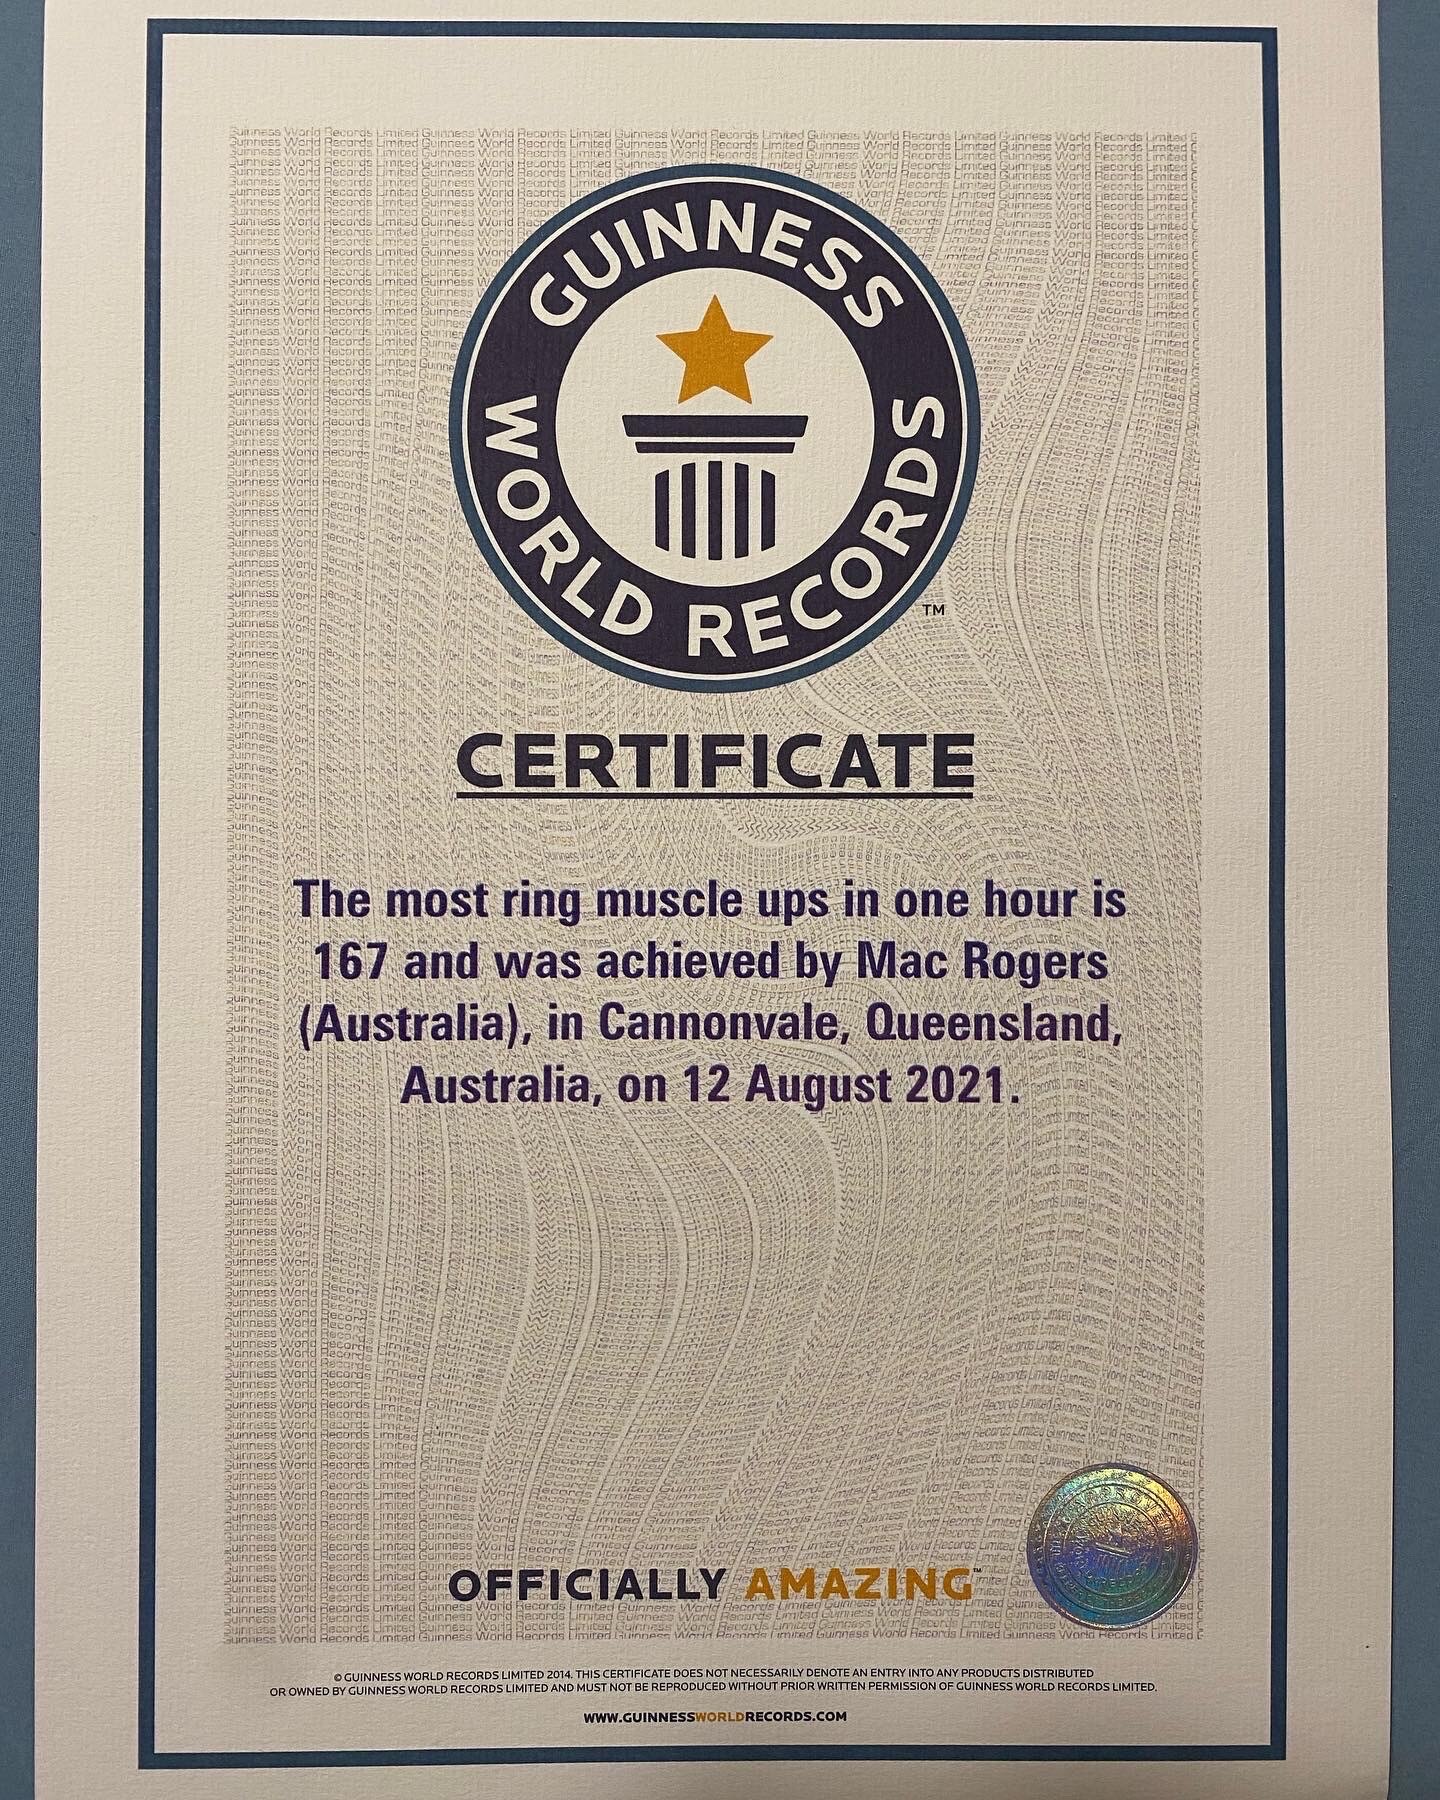 A Guinness World record certificate